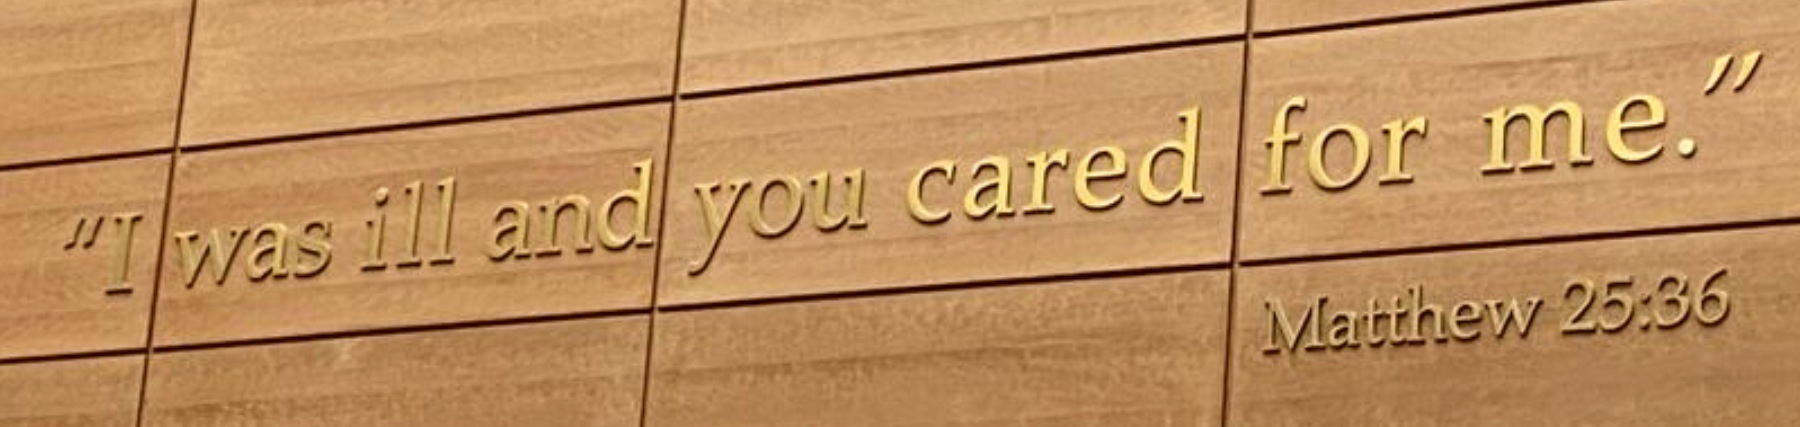 Image of a wall quote on Loyola University Chicago’s campus reading, ‘I was ill and you cared for me. - Matthew 25:36.’